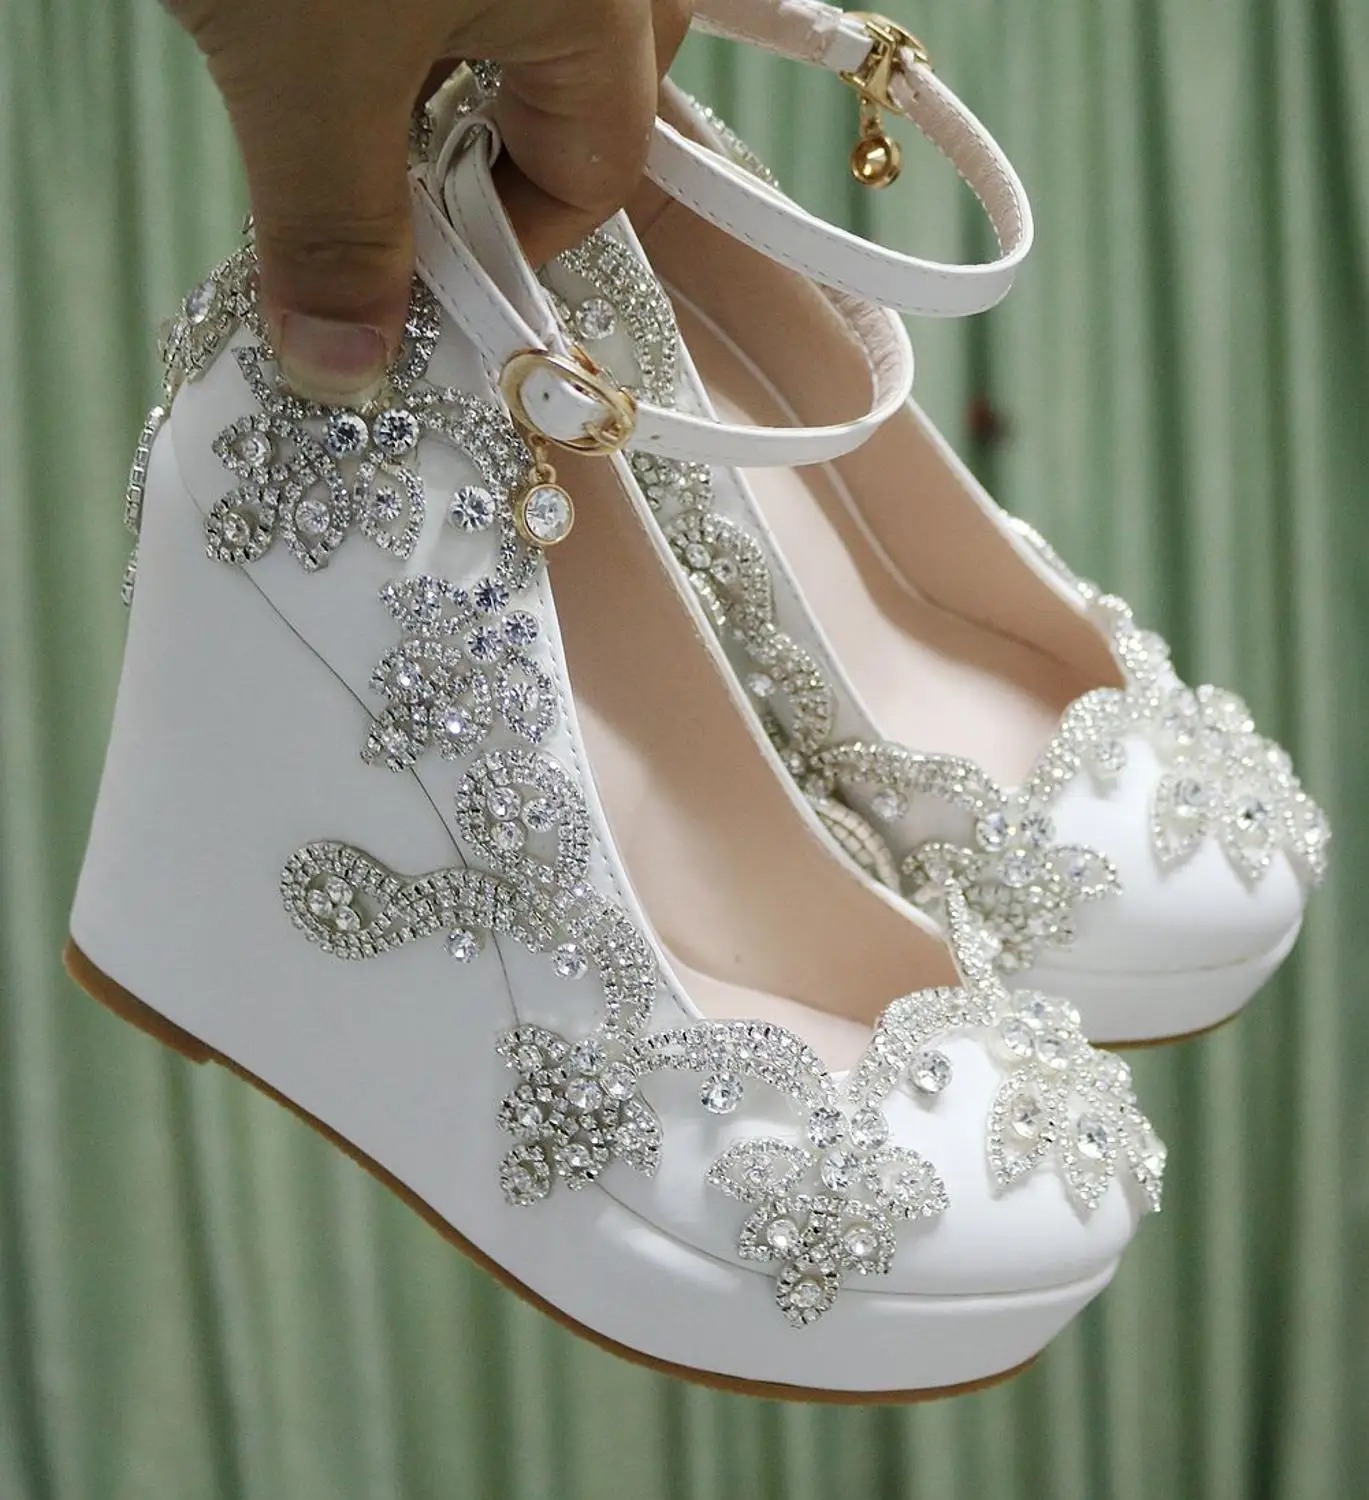 Sale Crystal Pumps Wedding-Shoes Clear-Heels Bride Evening-Party 10cm Christmas-Day GmJ9VXLA0